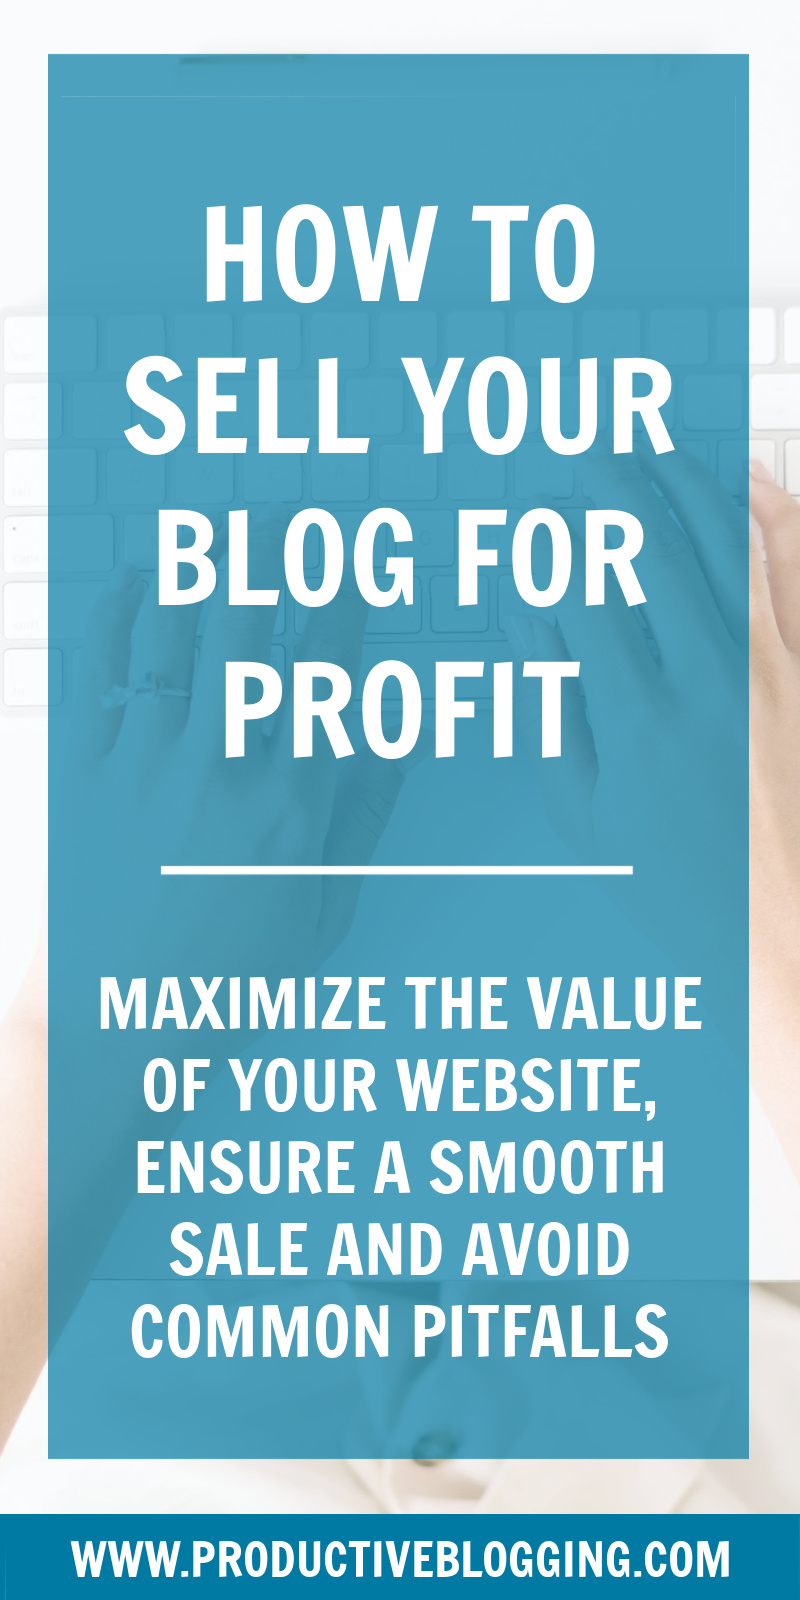 How to sell a blog for profit: maximize the value of your website, ensure a smooth sale and avoid common pitfalls. #sellablog #sellawebsite #sellabusiness #empireflippers #blogflipping #websiteflipping #digitalentrepreneur #digitalentrepreneurship #onlinebusiness #onlinebusinessowner #onlinebusinesstips #blogmonetization #makemoneyblogging #blogging #blogger #professionalblogger #bloggingismyjob #solopreneur #mompreneur #fempreneur #bloggingbiz #bloggingtips #productivitytips #productiveblogging